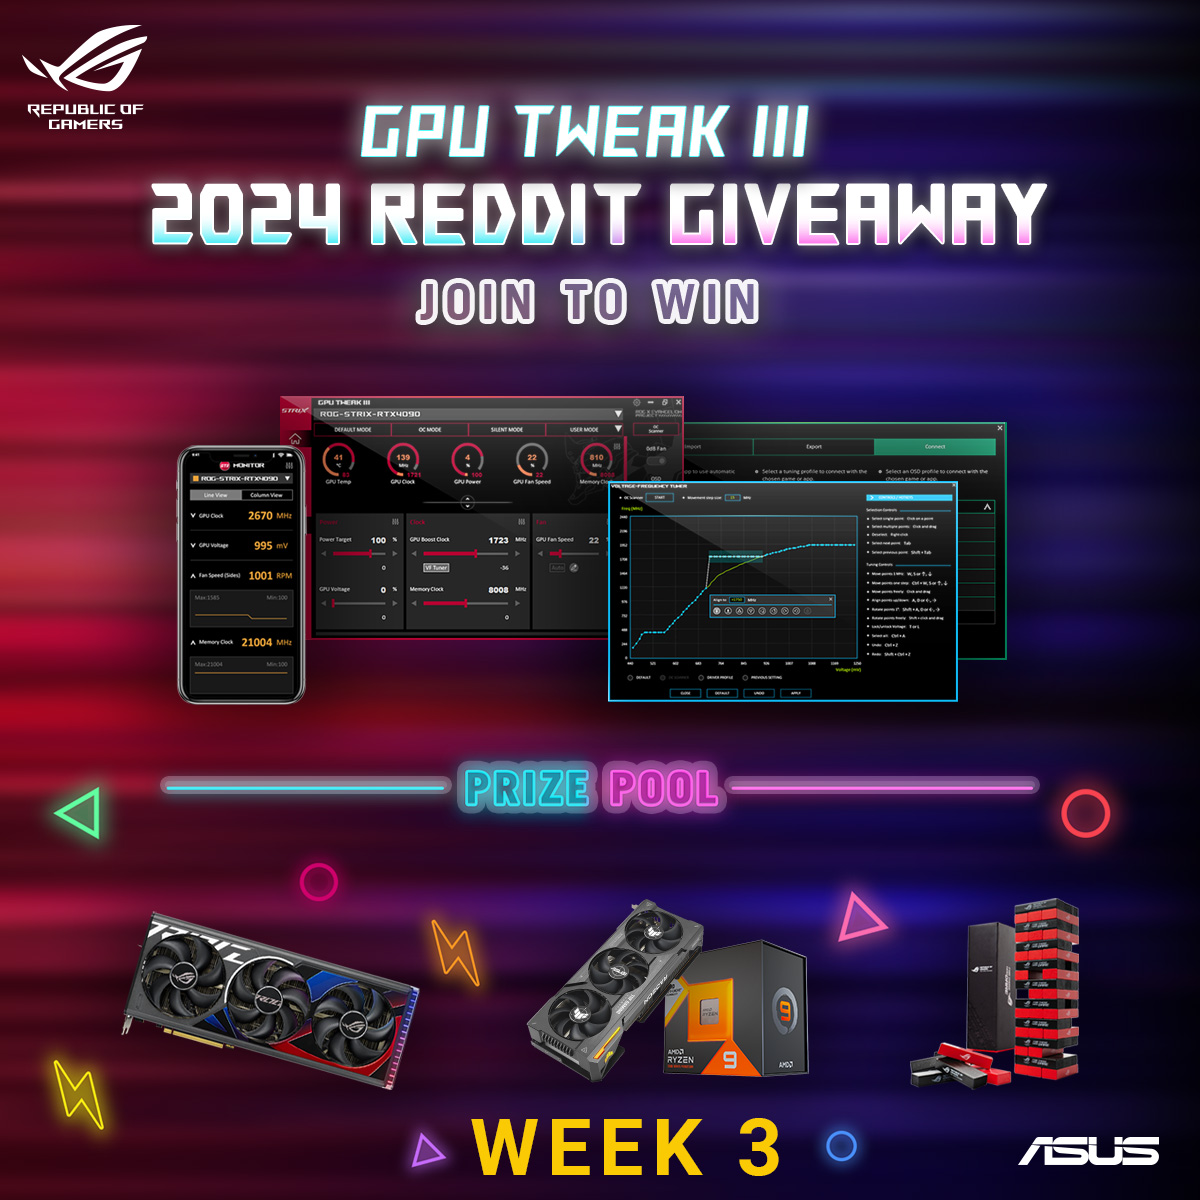 Week 3 of the WORLDWIDE ASUS ROG x PCMR giveaway event! ➡️redd.it/1cgwxqg Now we're focusing on Monotoring your hardware with GPU Tweak III ! Enter to win an ROG STRIX RTX 4080 SUPER, a TUF Gaming RX 7900 XT, a Ryzen 9 7950X3D, and many other ASUS ROG Goodies! 🥳